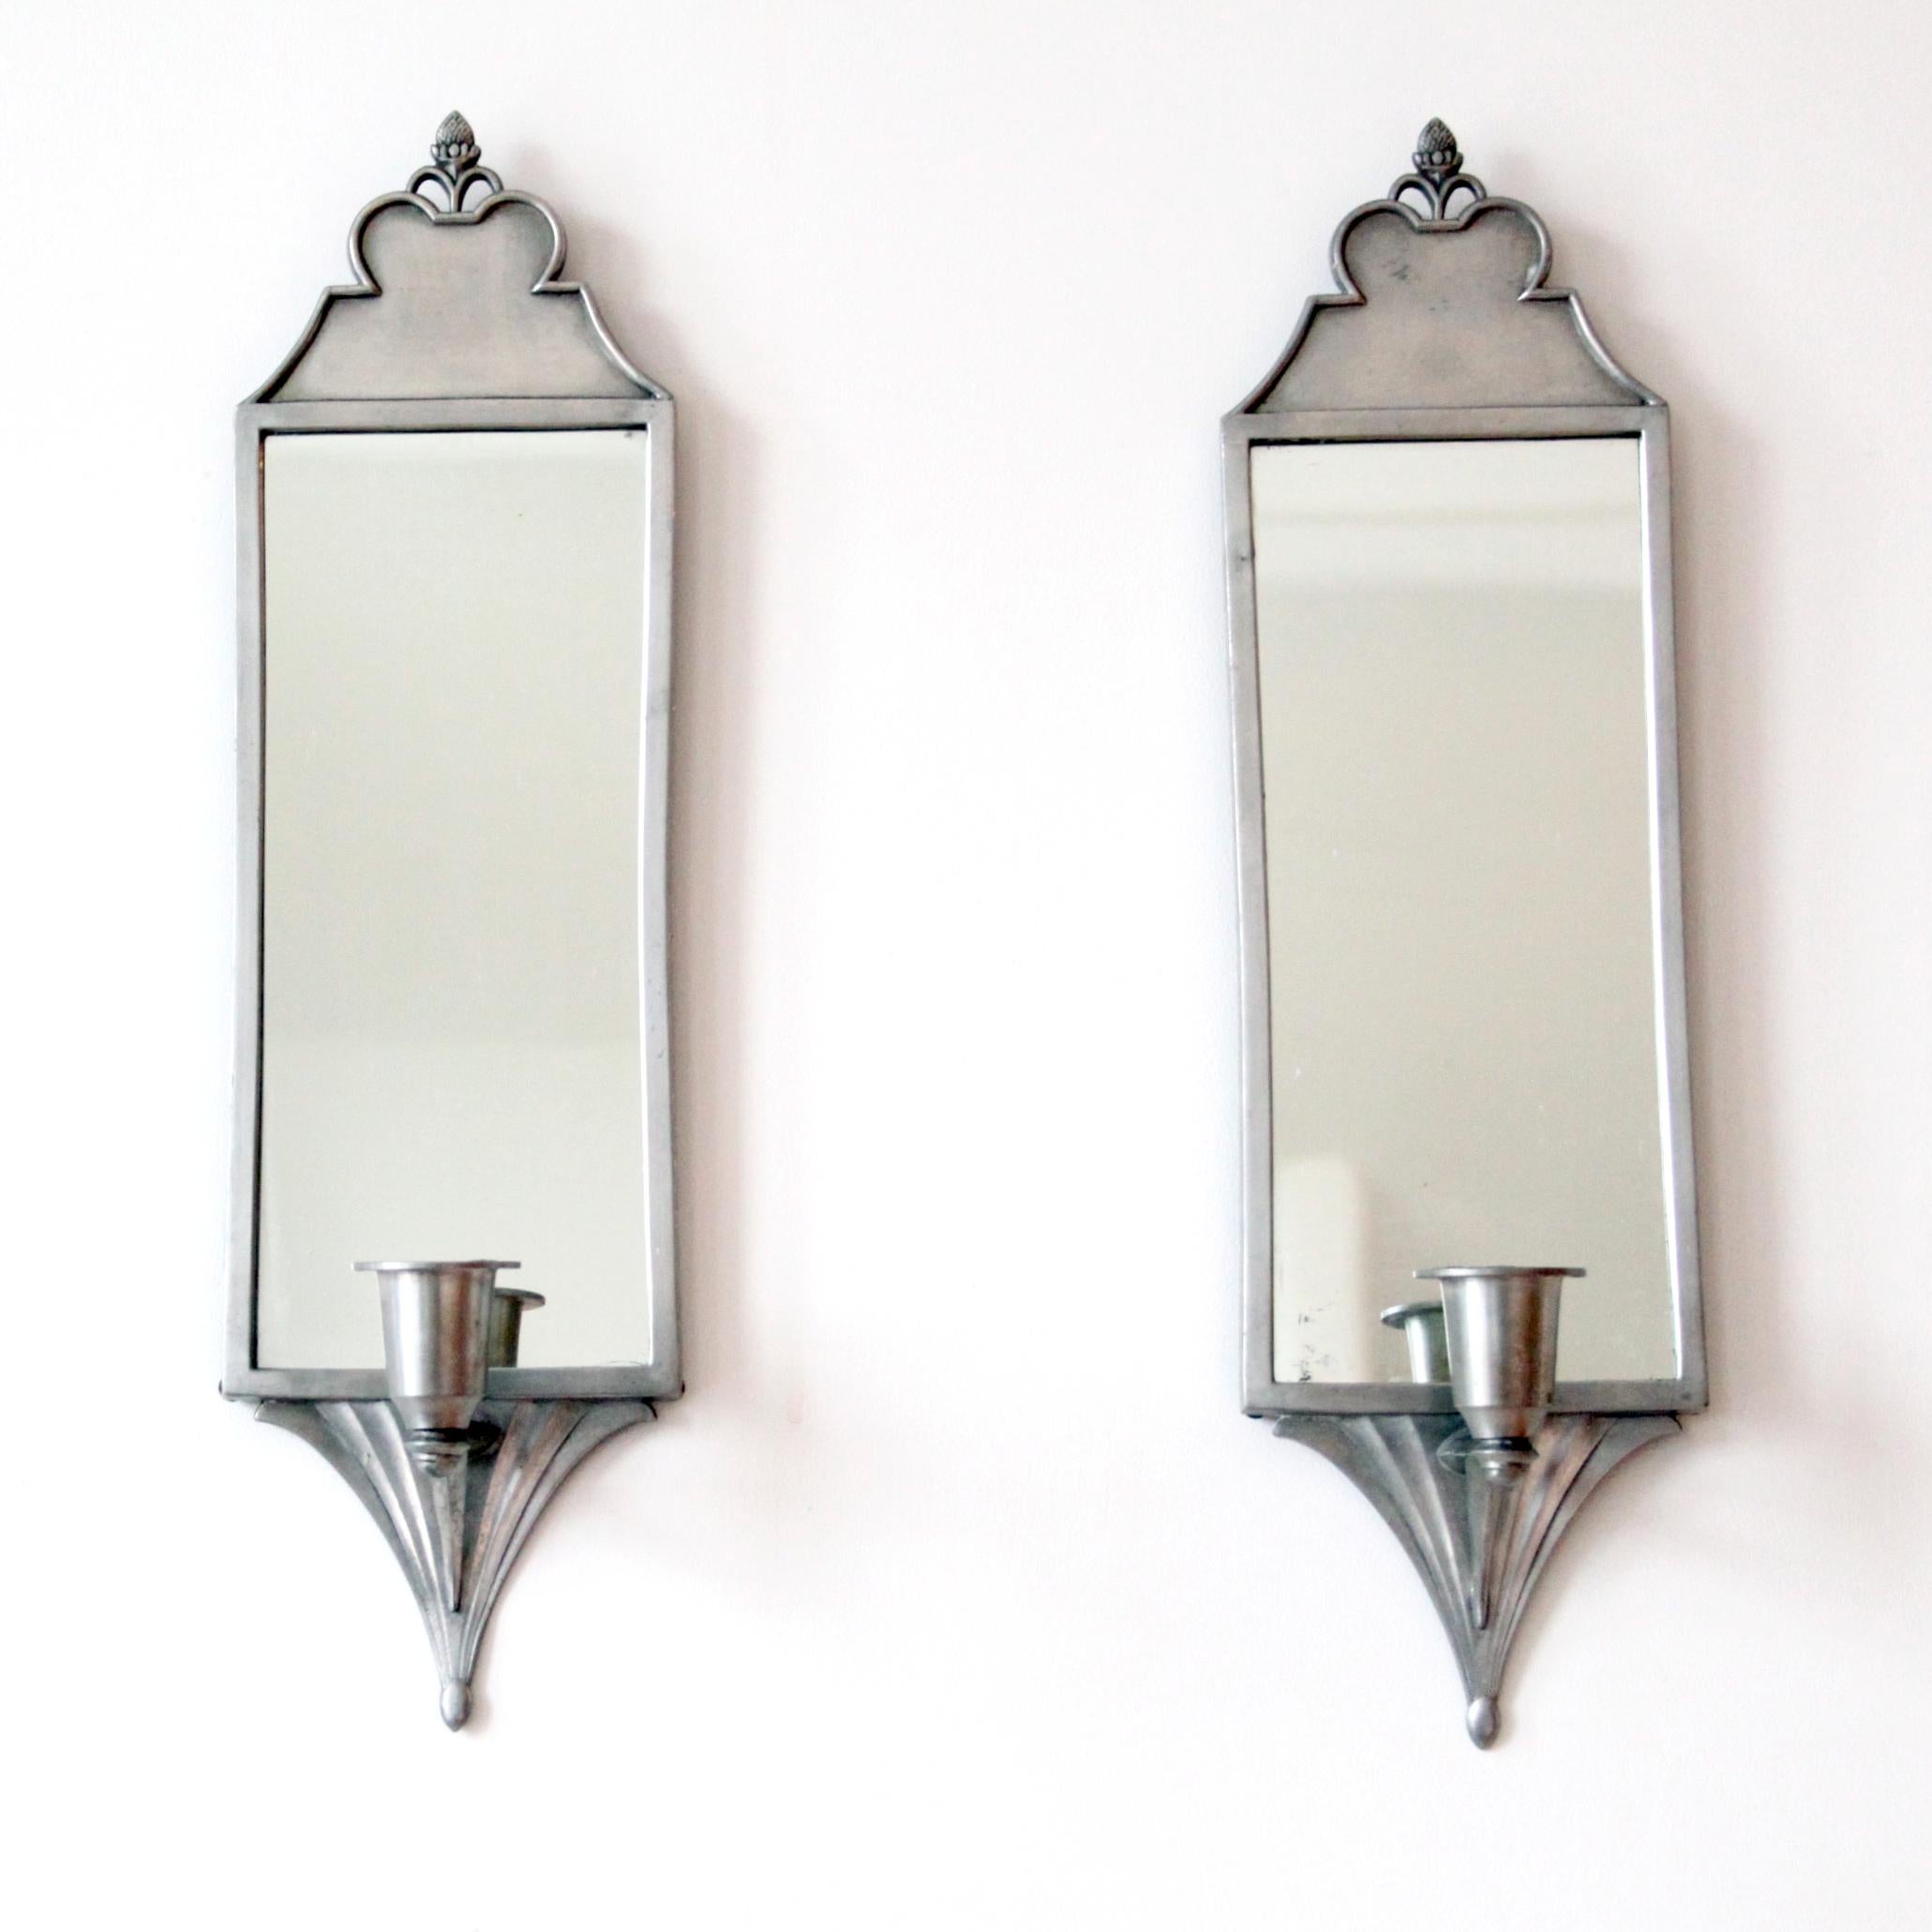 Danish Pair of Just Andersen Candle Sconces in Pewter, Denmark 1918-1929